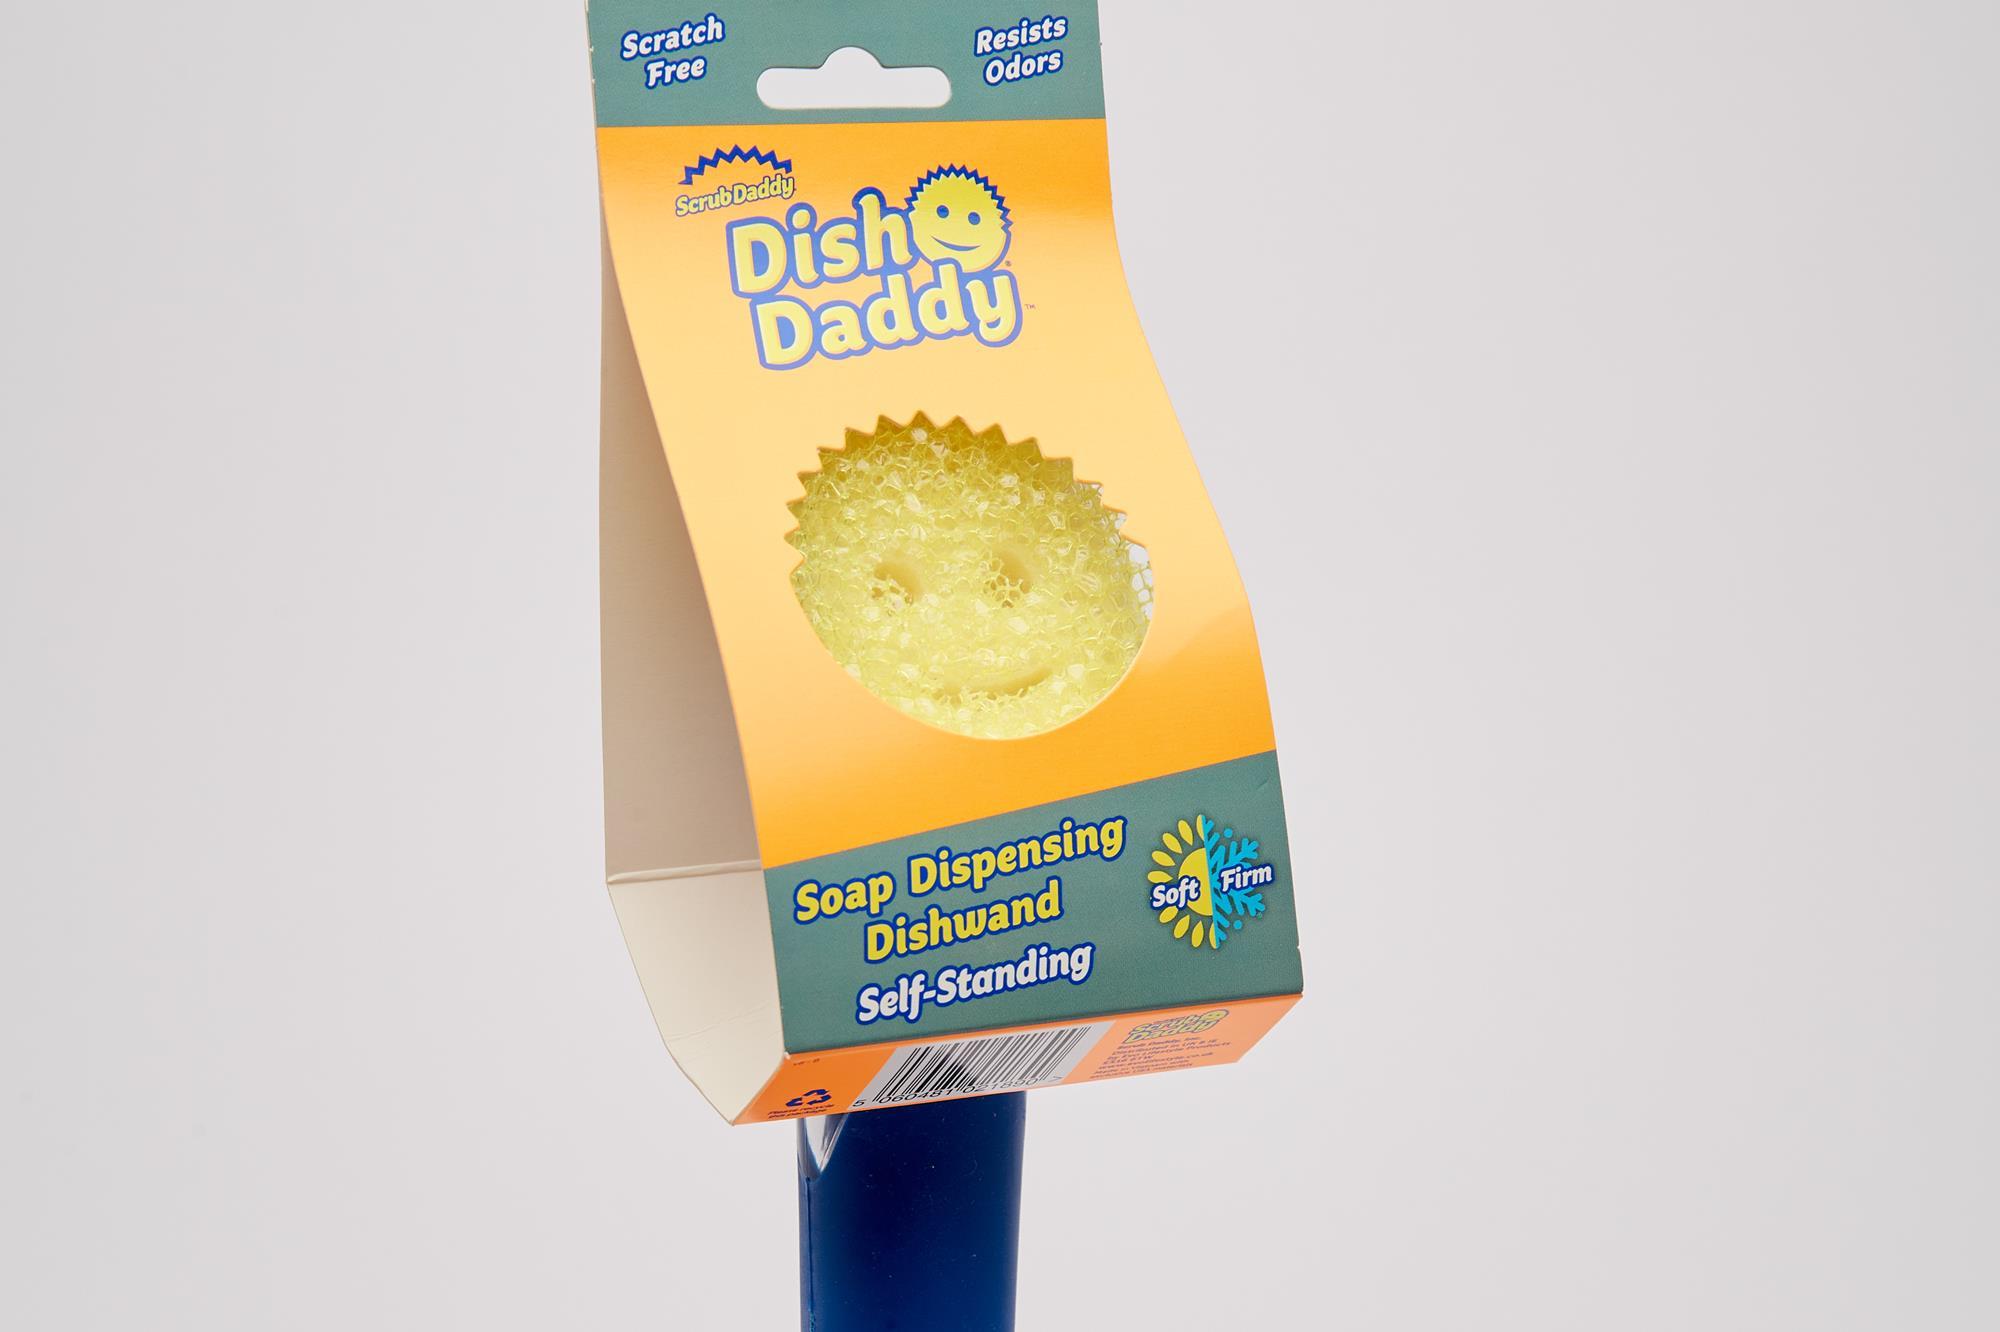 Brand new Dish Daddy! The soap dispensing dish wand available now